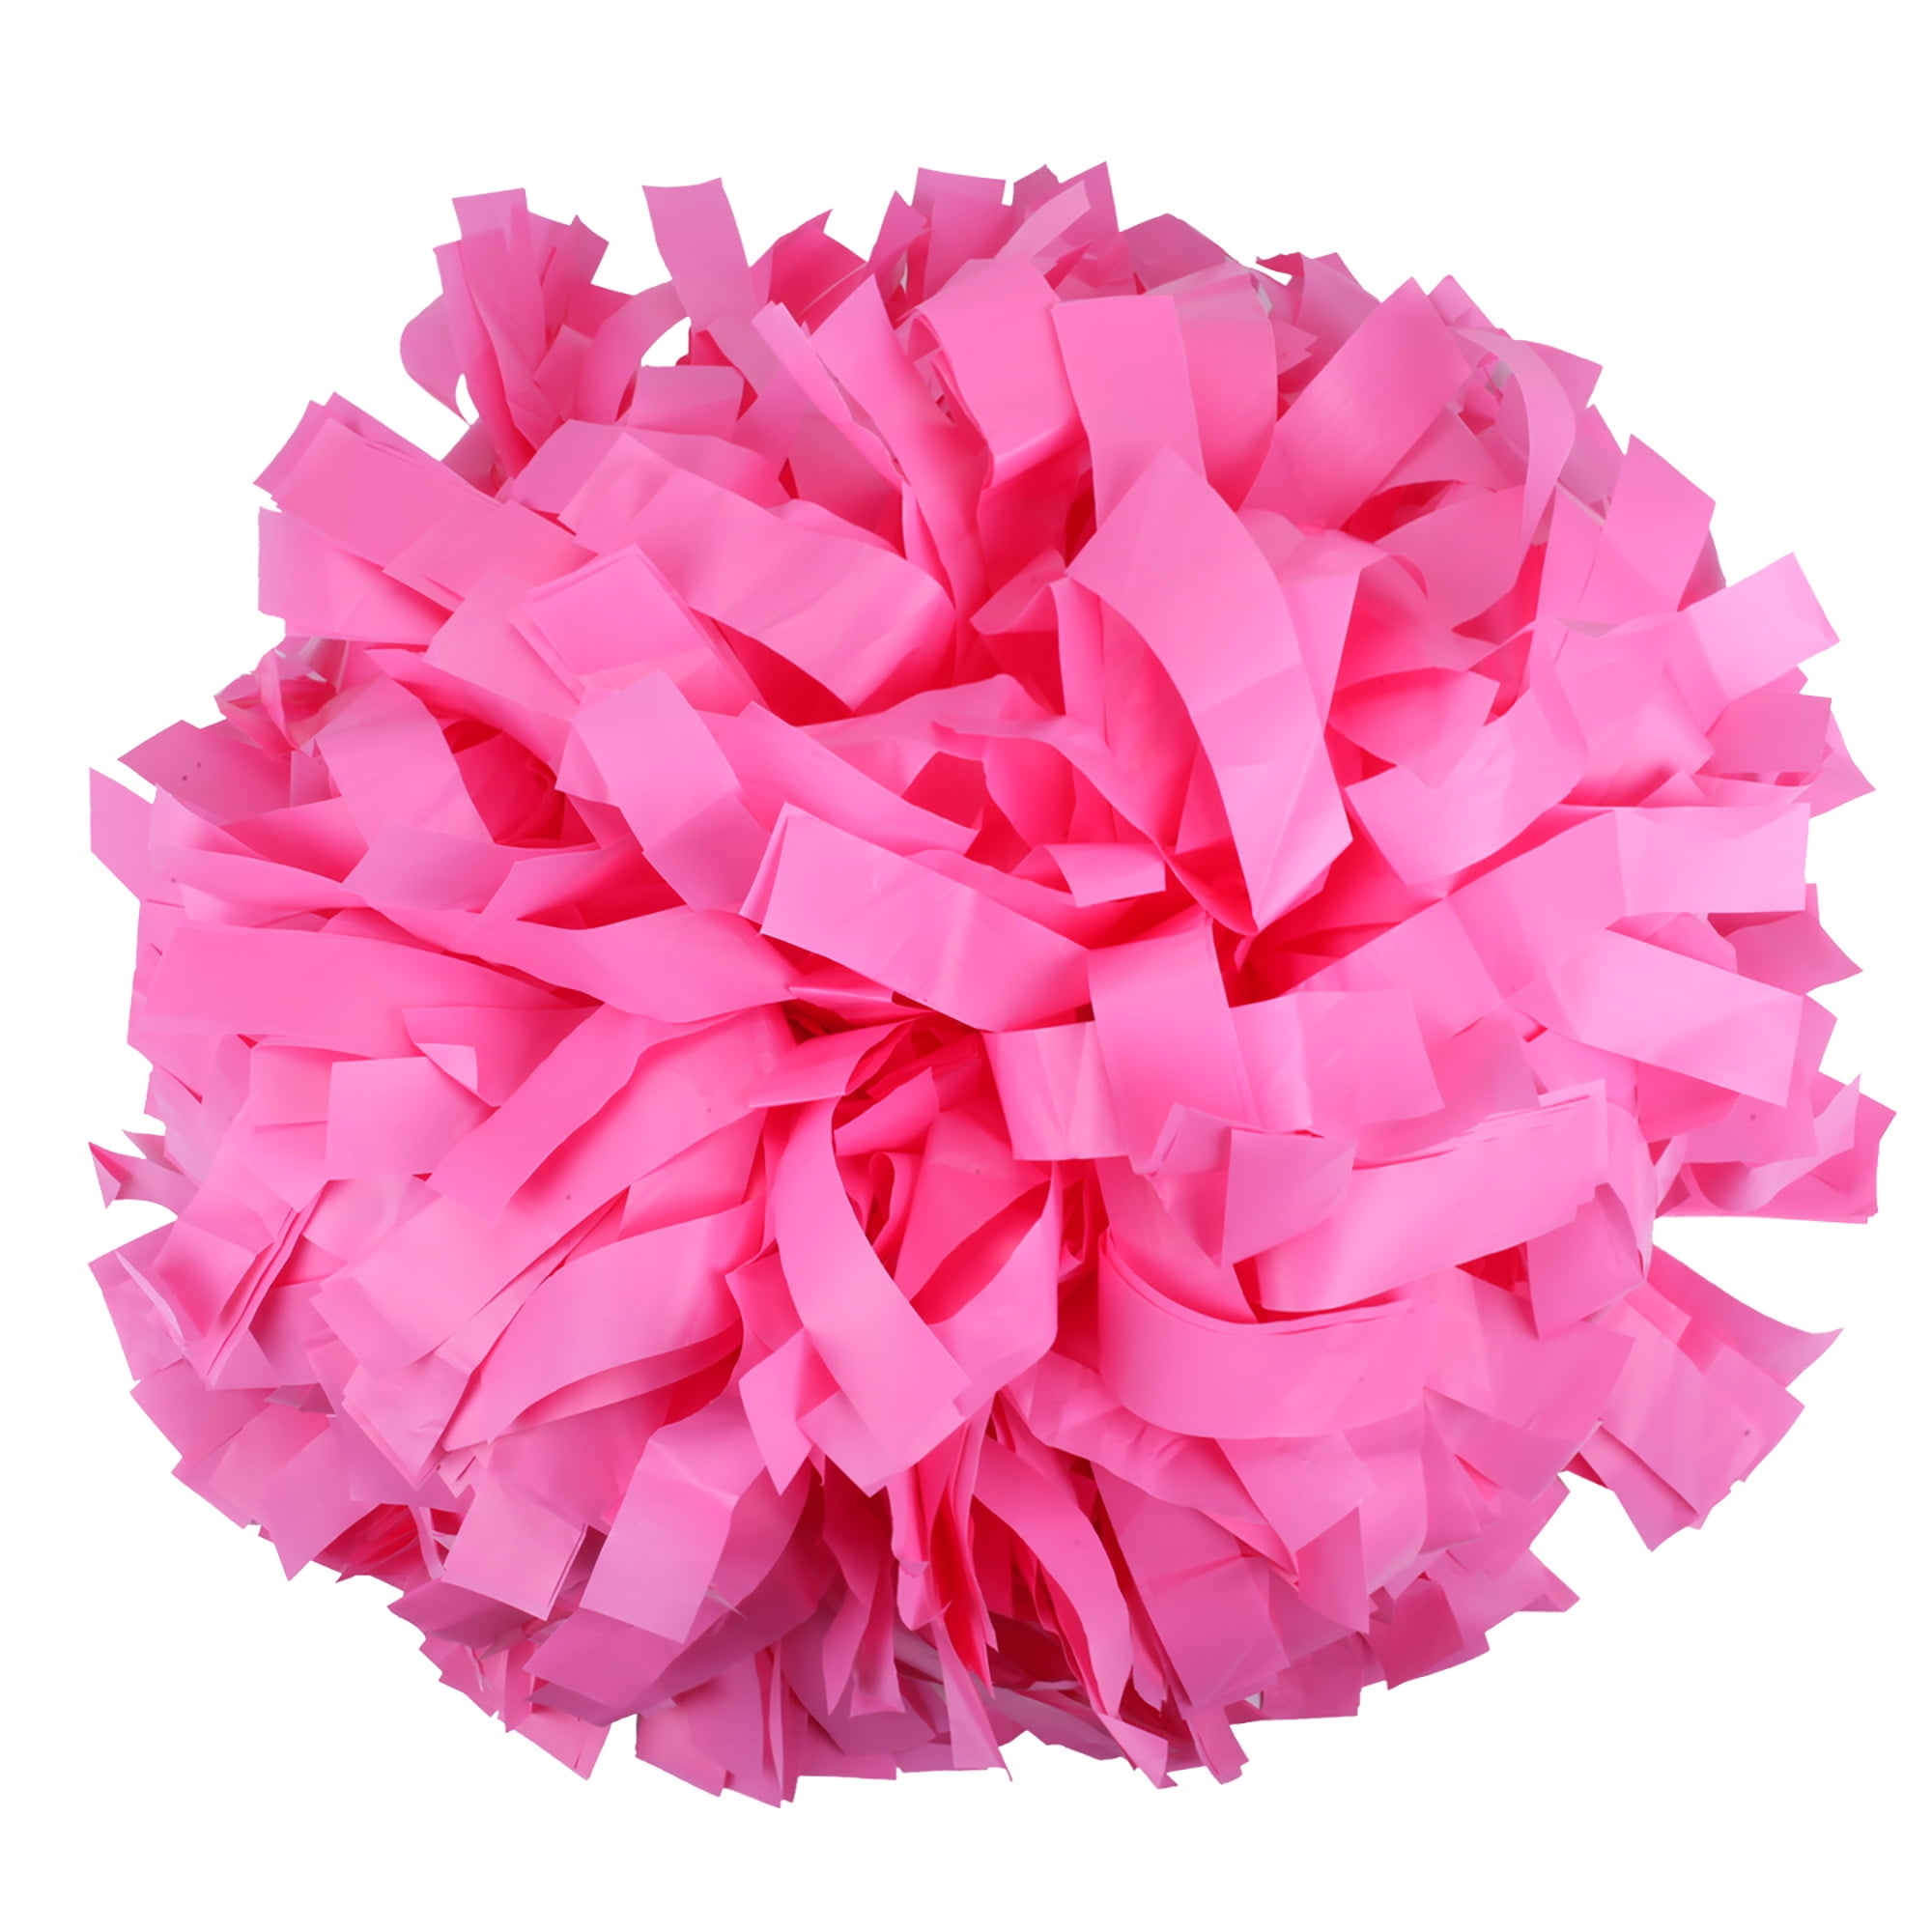 Plastic Cheer Pom Poms Cheerleading Cheerleader Gear 2 pieces one pair poms(Royal  blue/Red) 